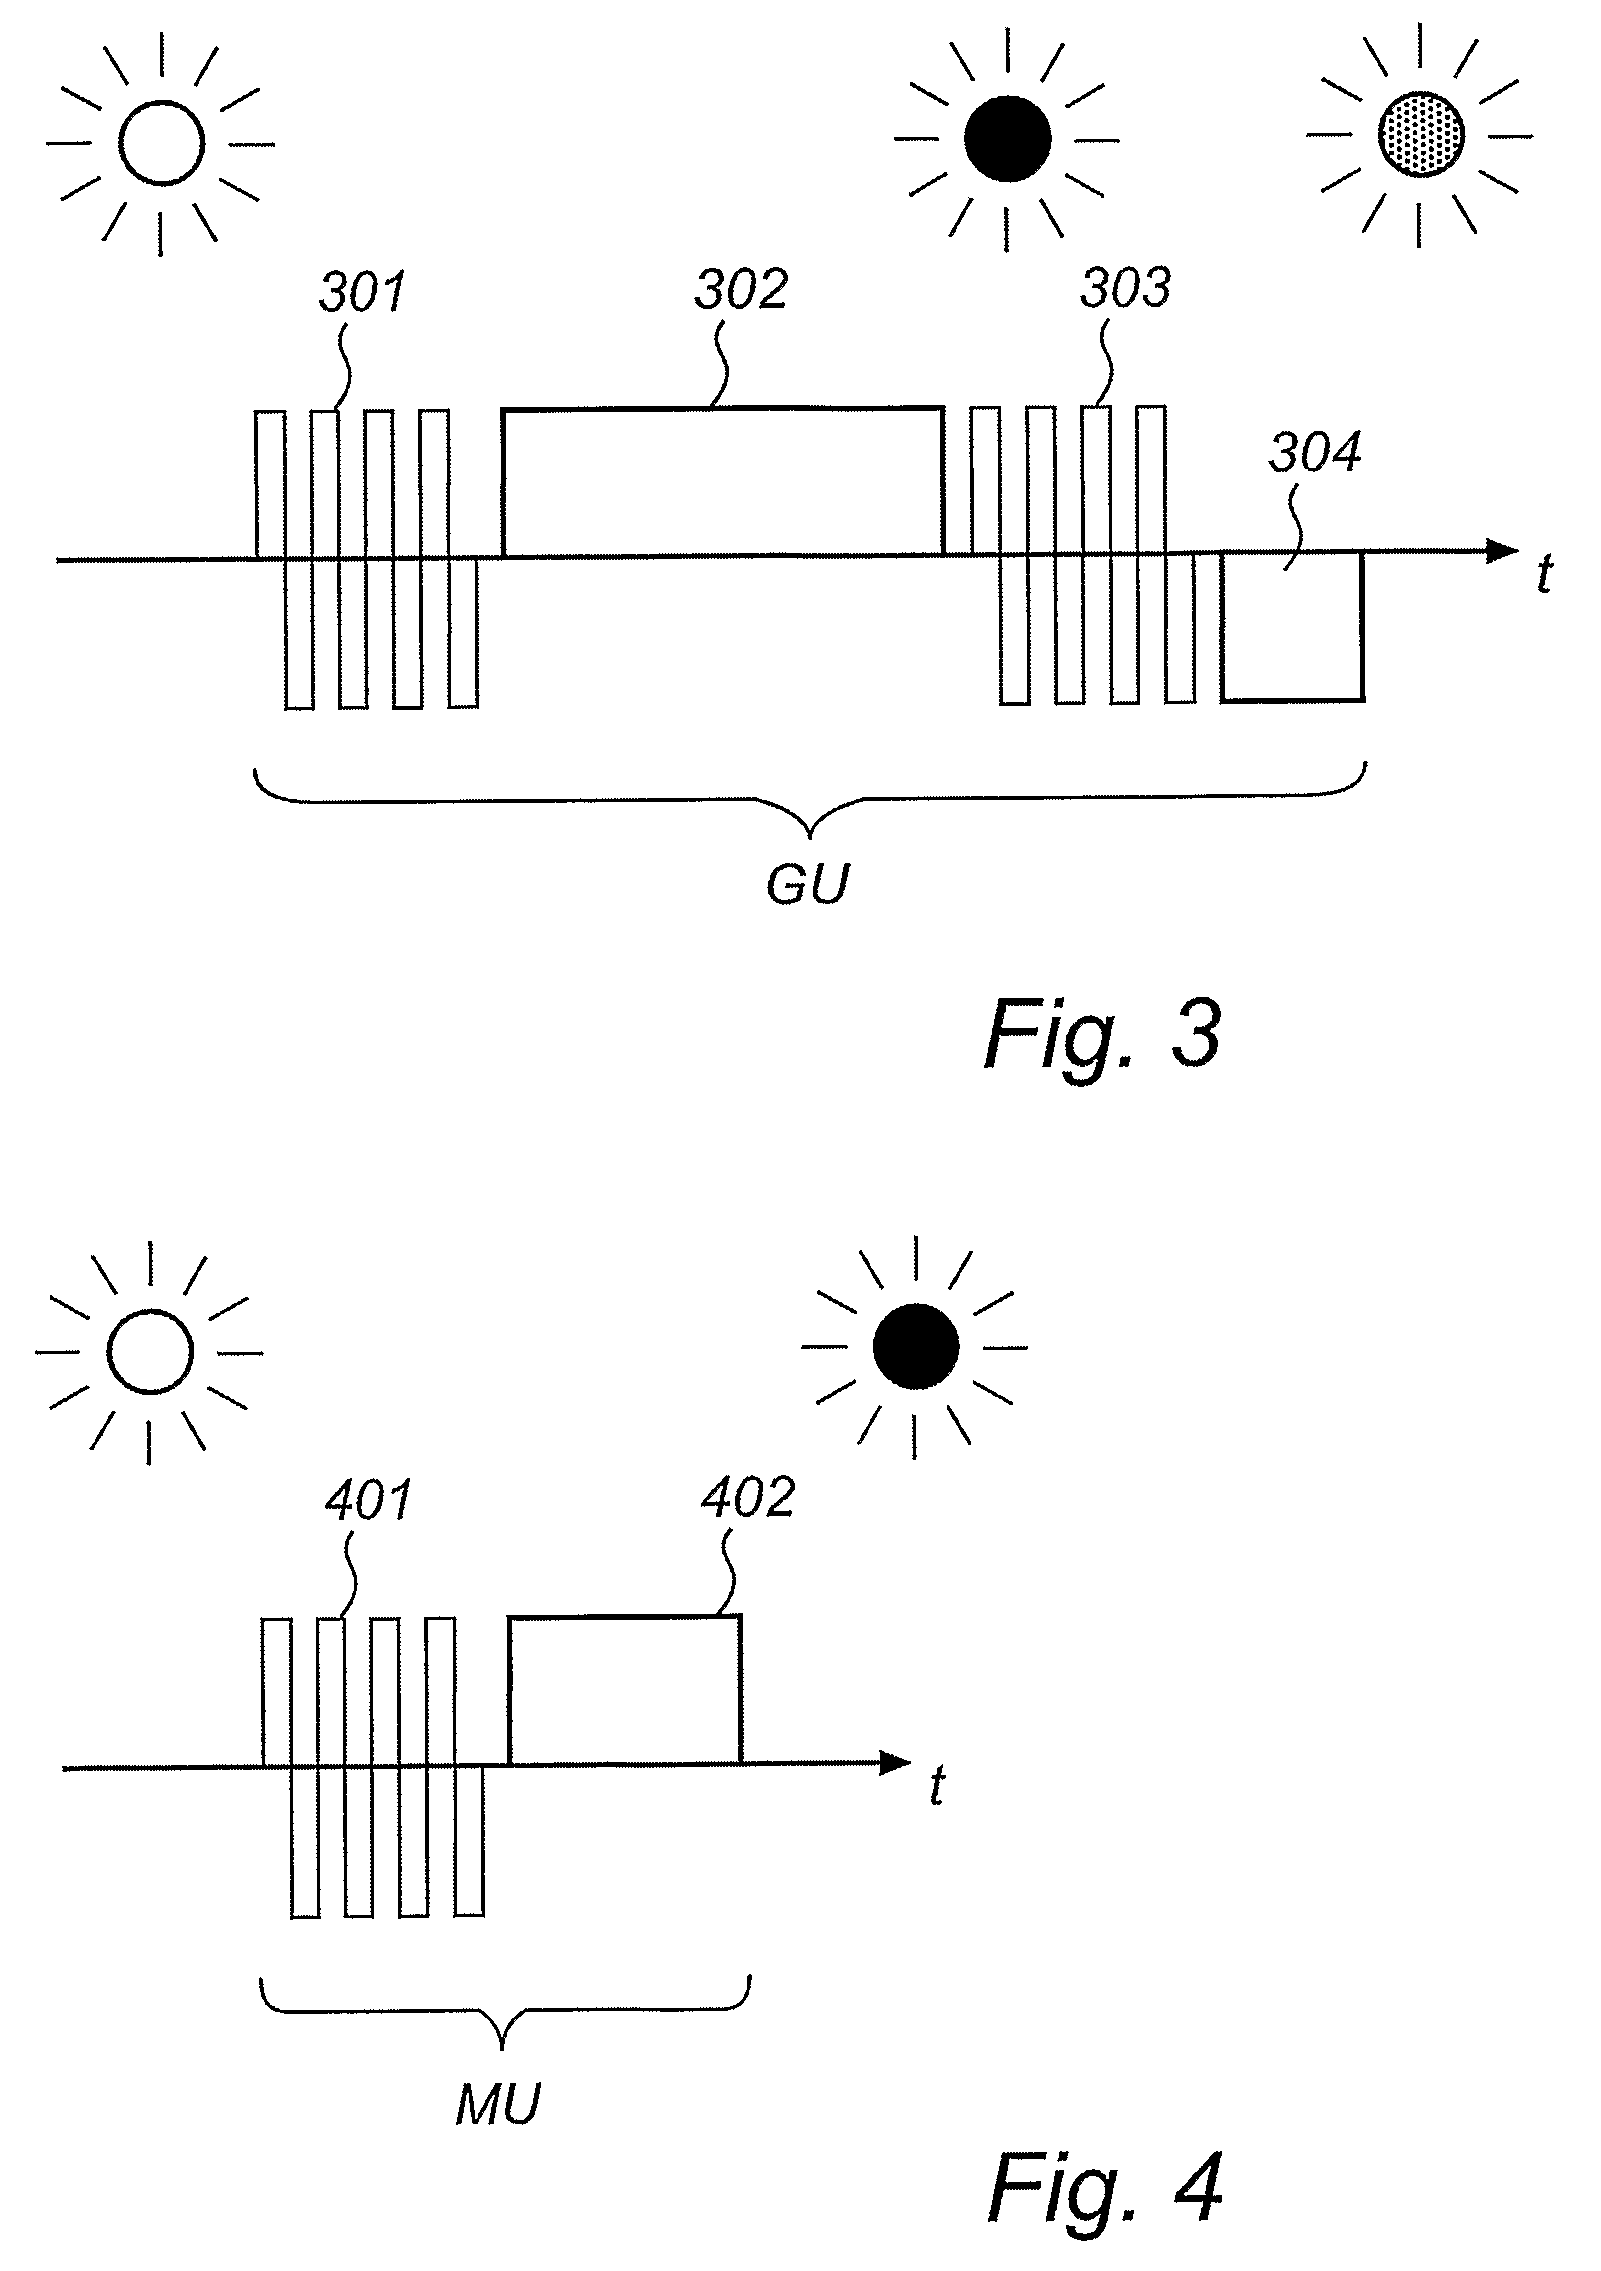 Transition between grayscale and monochrome addressing of an electrophoretic display